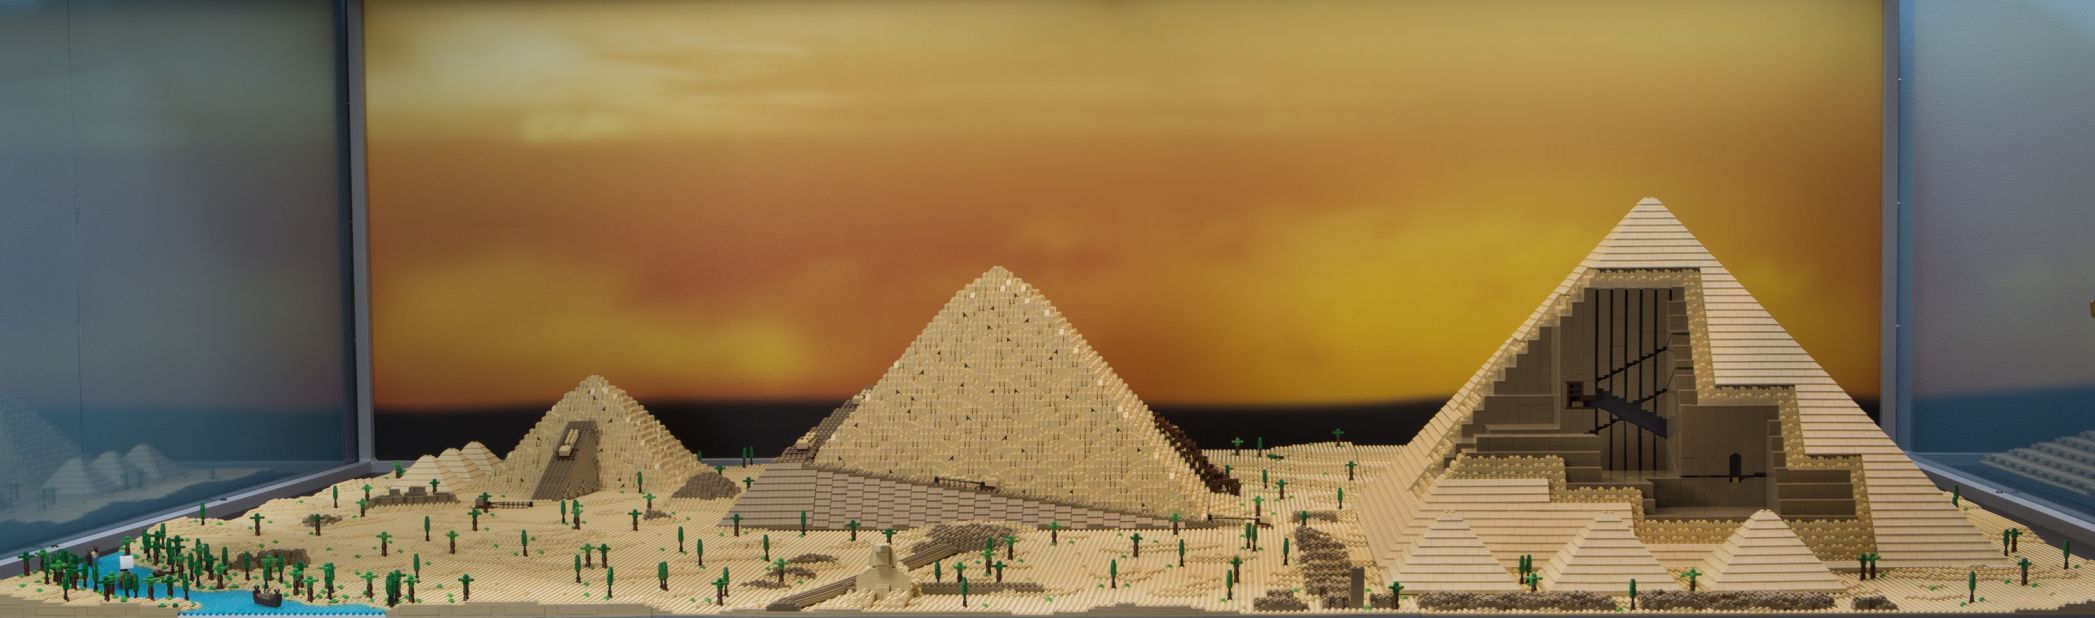 The pyramids took 45 hours build and are made up of 24,000 bricks. A close look reveals that the corner contains rare Lego pieces that are no longer made. 